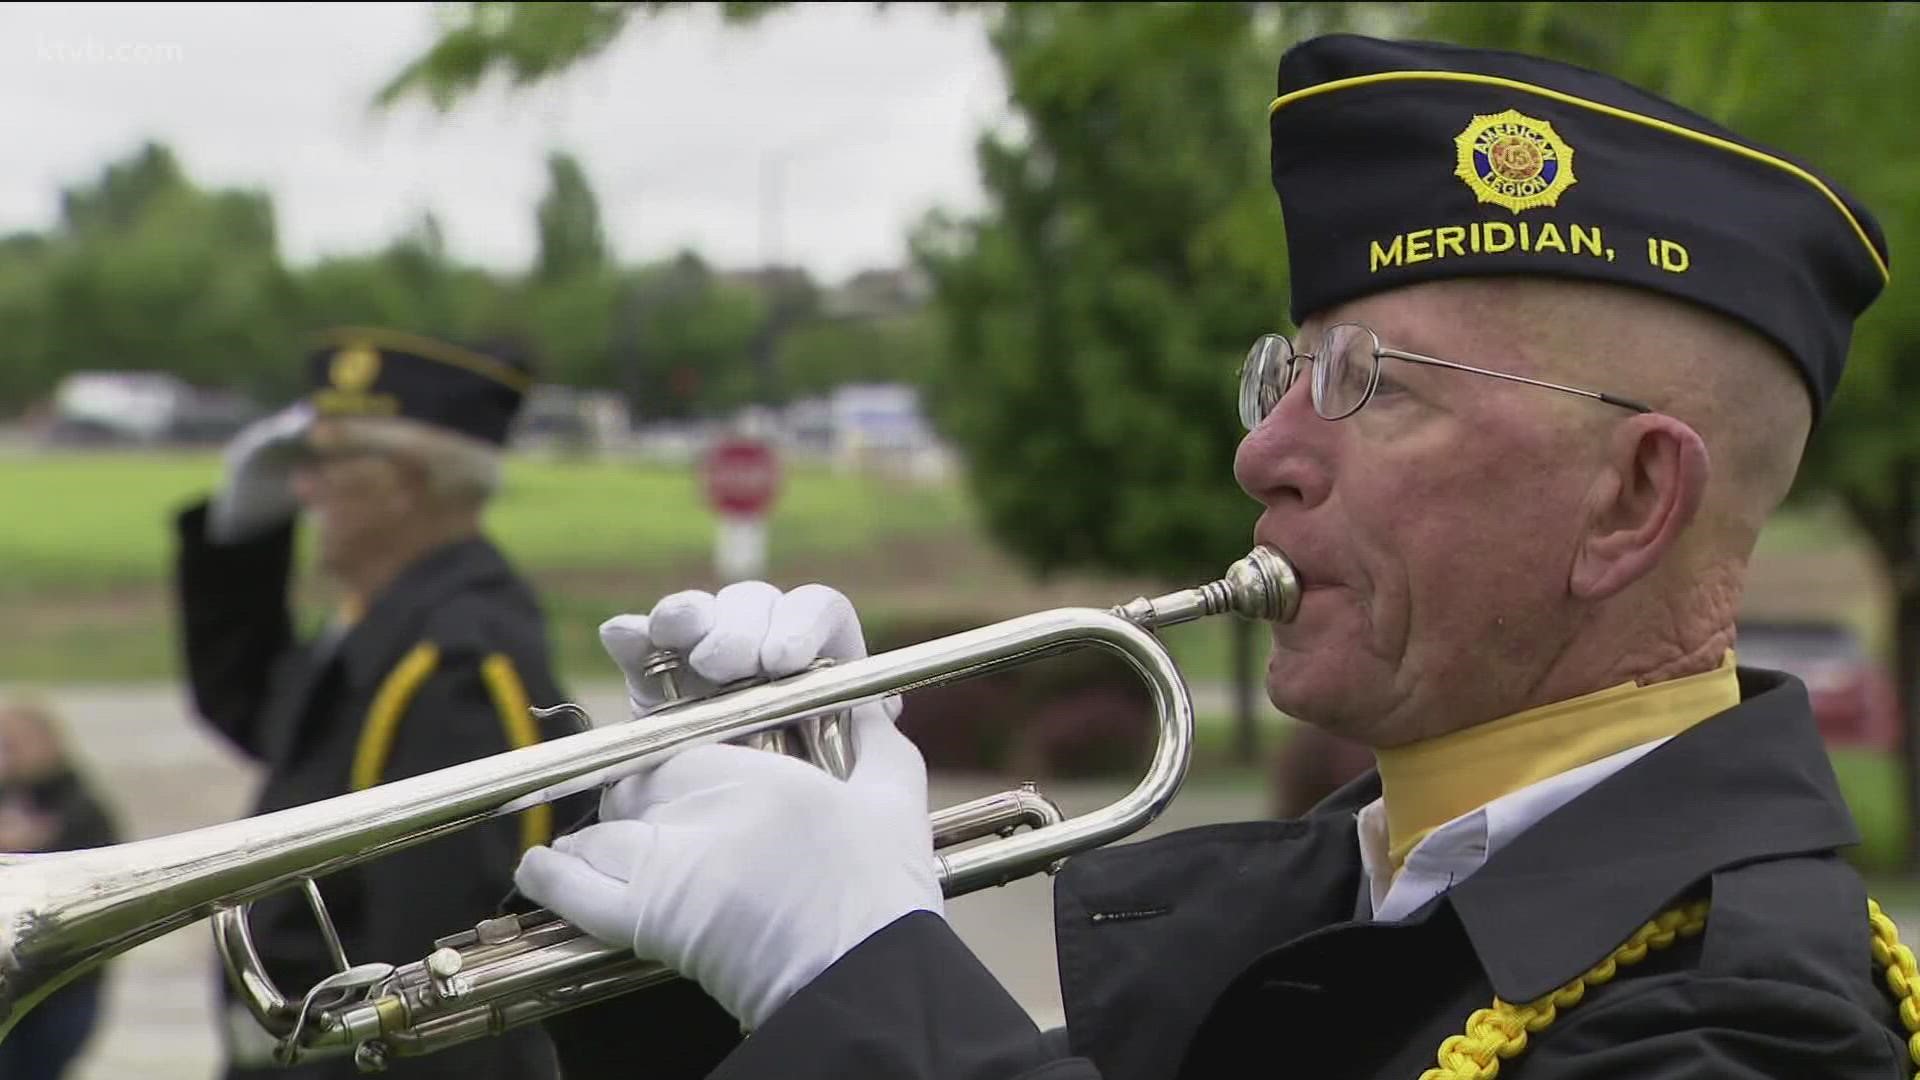 The event featured an address by Mayor Robert Simison, a wreath laying, a rifle salute, the playing of Taps, and the reading of 62 fallen Meridian heroes' names.